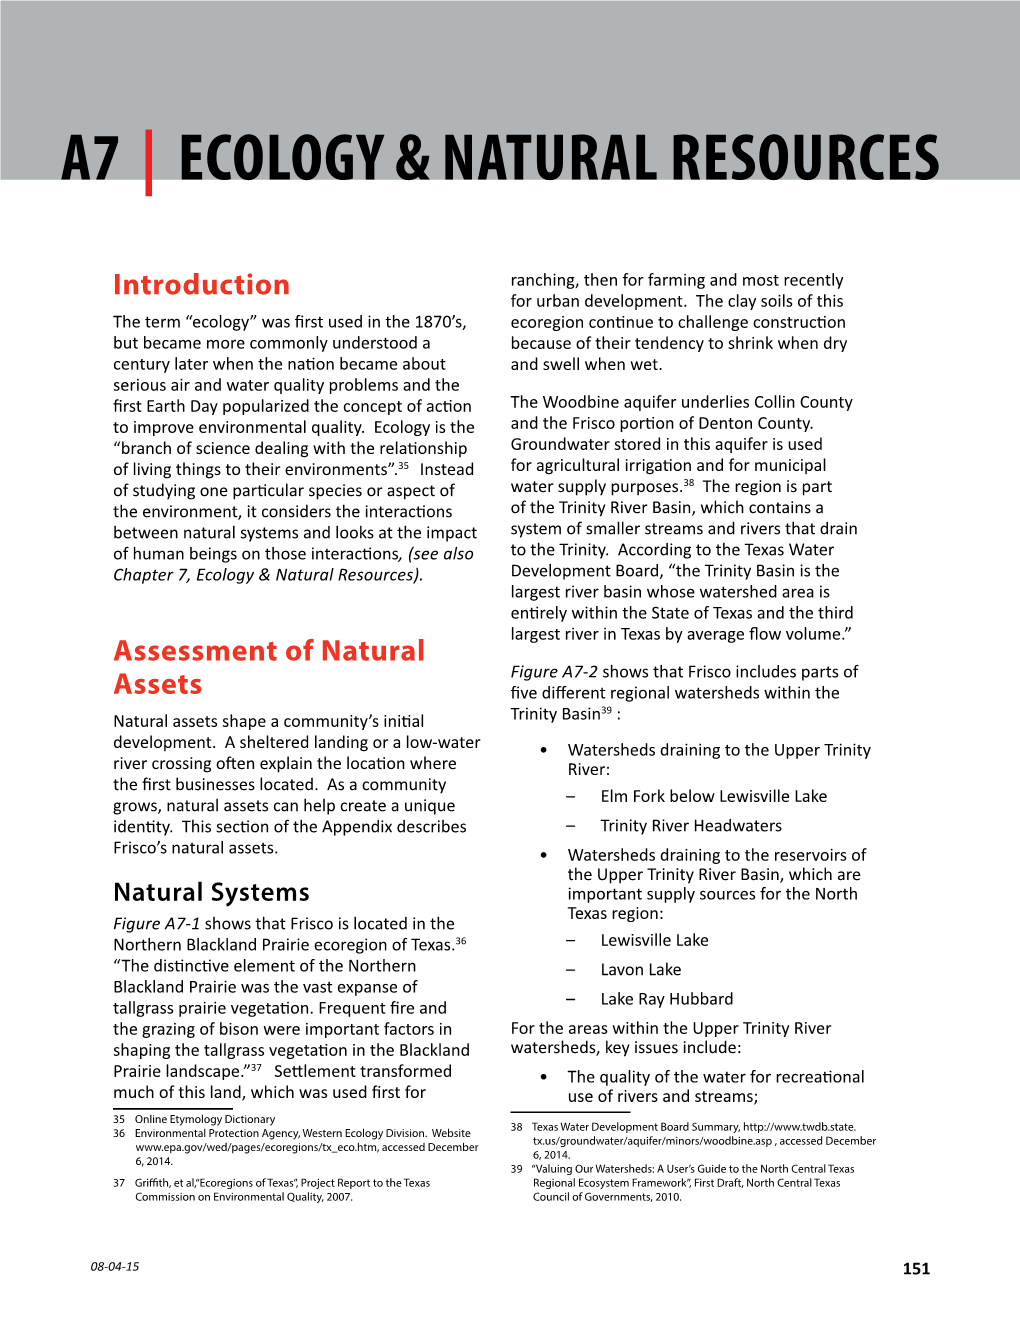 A7 | Ecology & Natural Resources